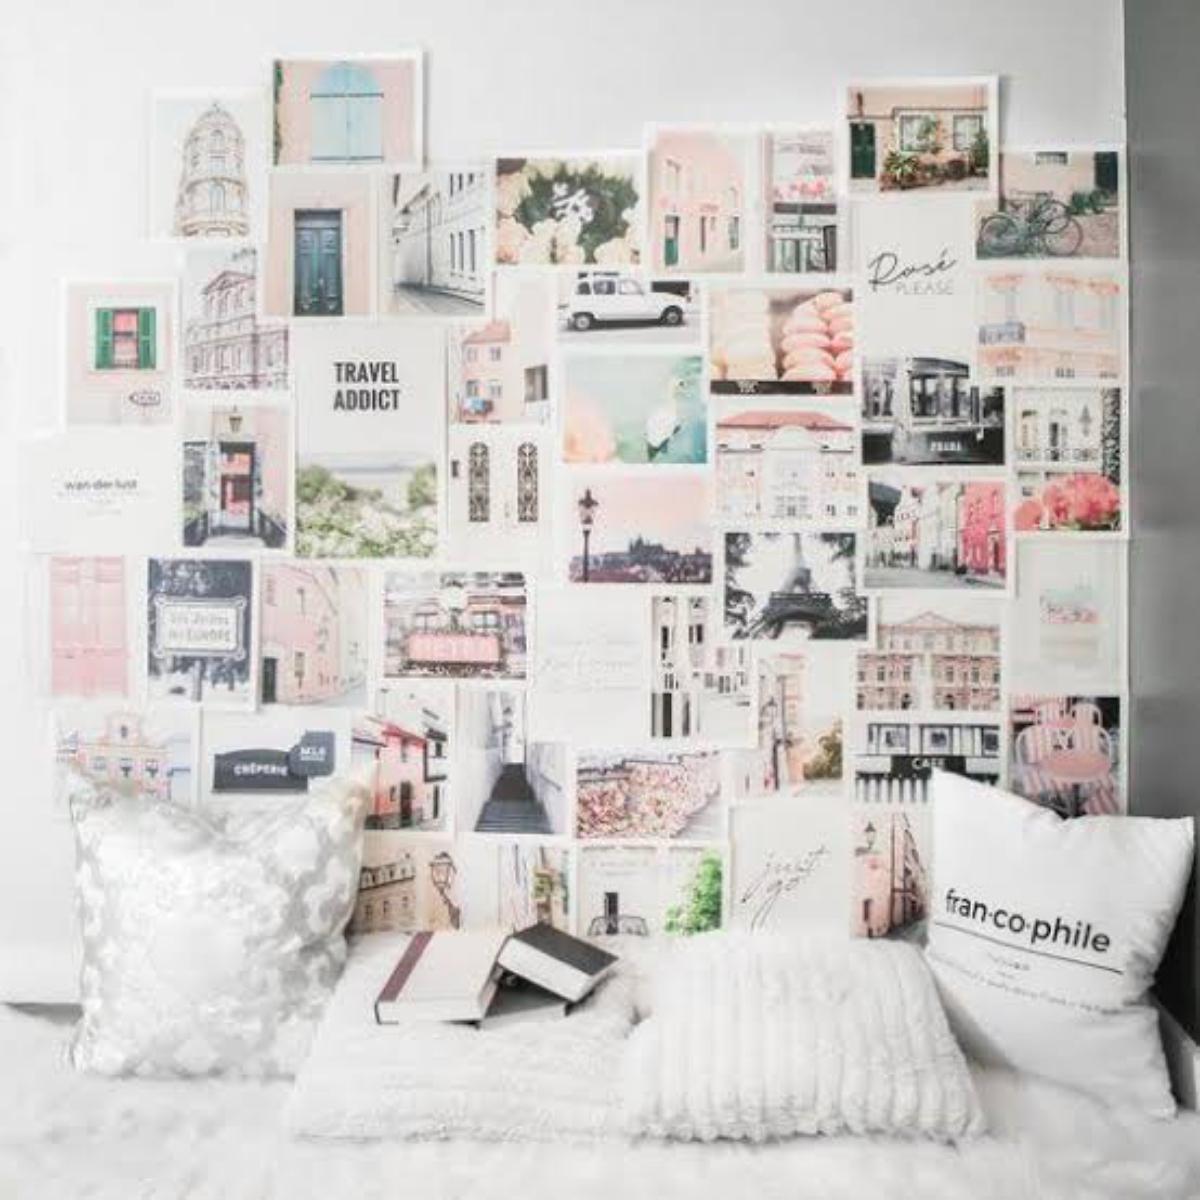 How to use your vision board.